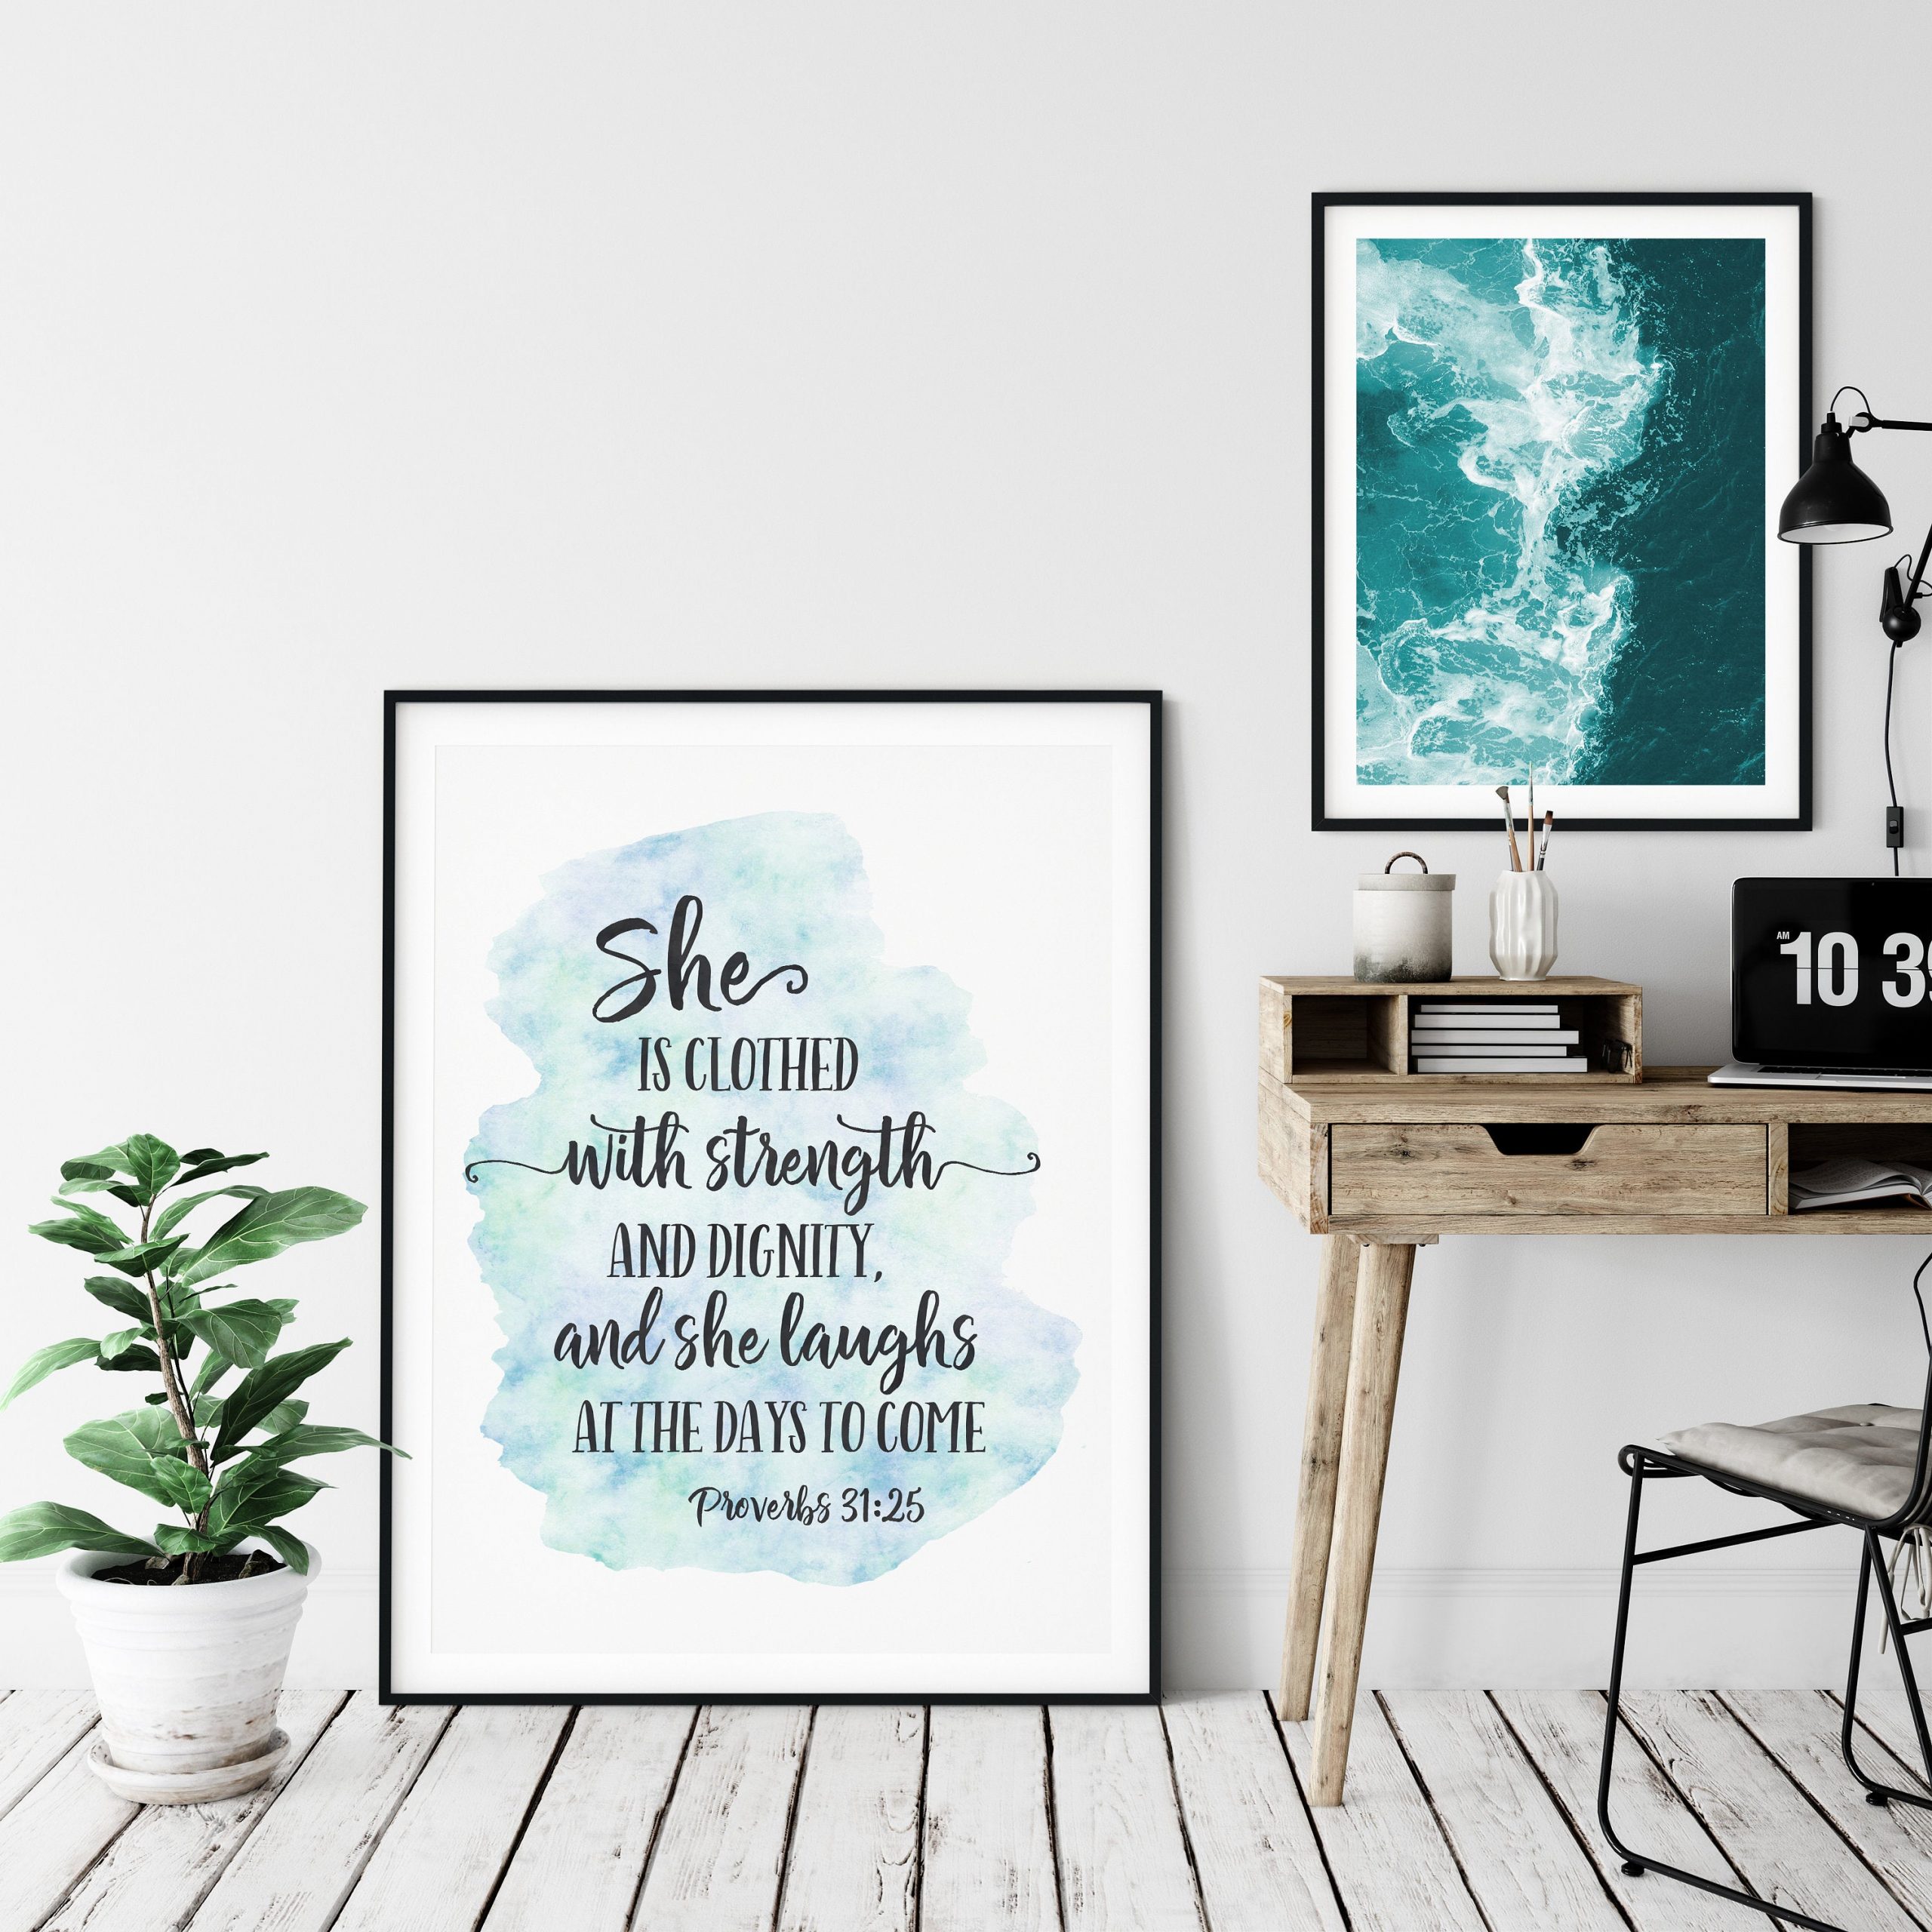 She is Clothed in Strength and Dignity, Proverbs 31:25, Bible Verse Wall Art, Girls Room Decor